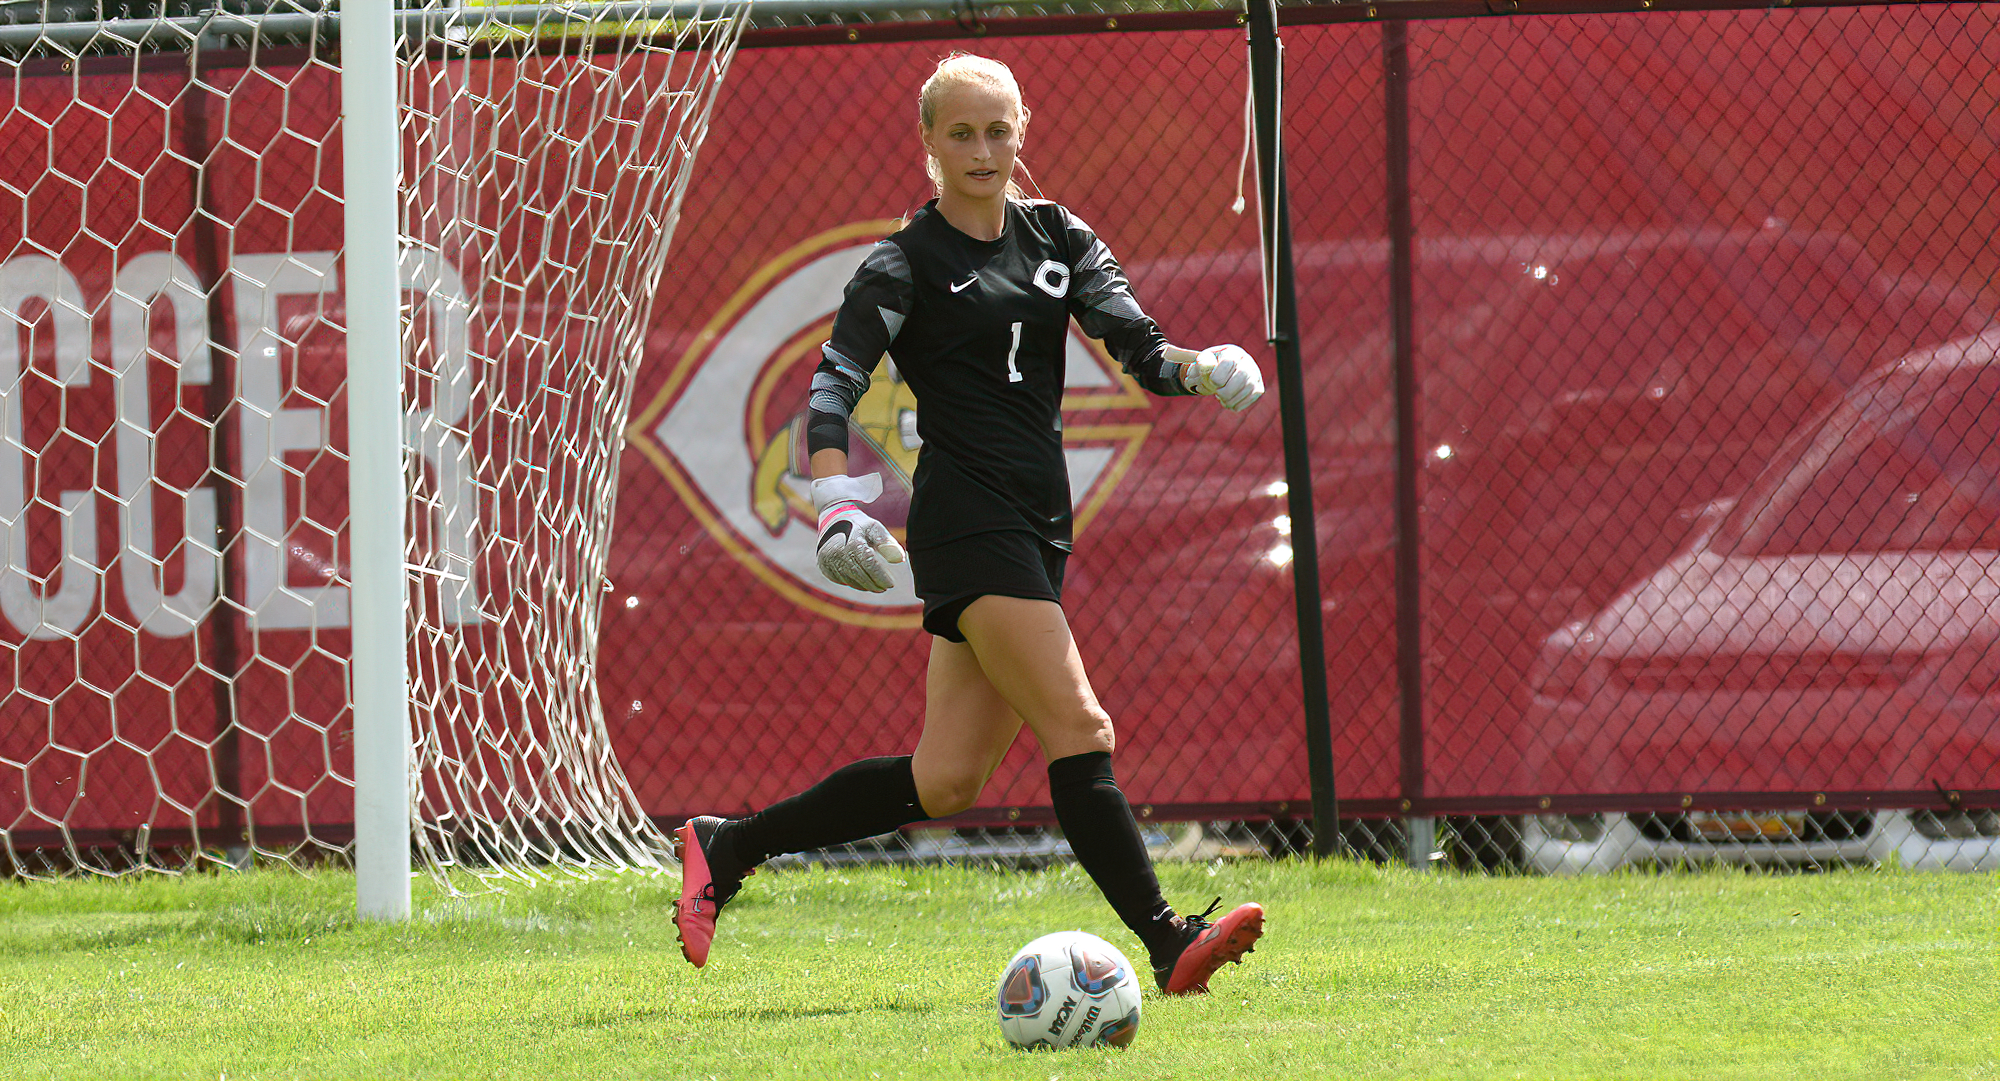 Sophomore goalie Bre Nelson made four saves in the Cobbers' conference opener at Macalester.